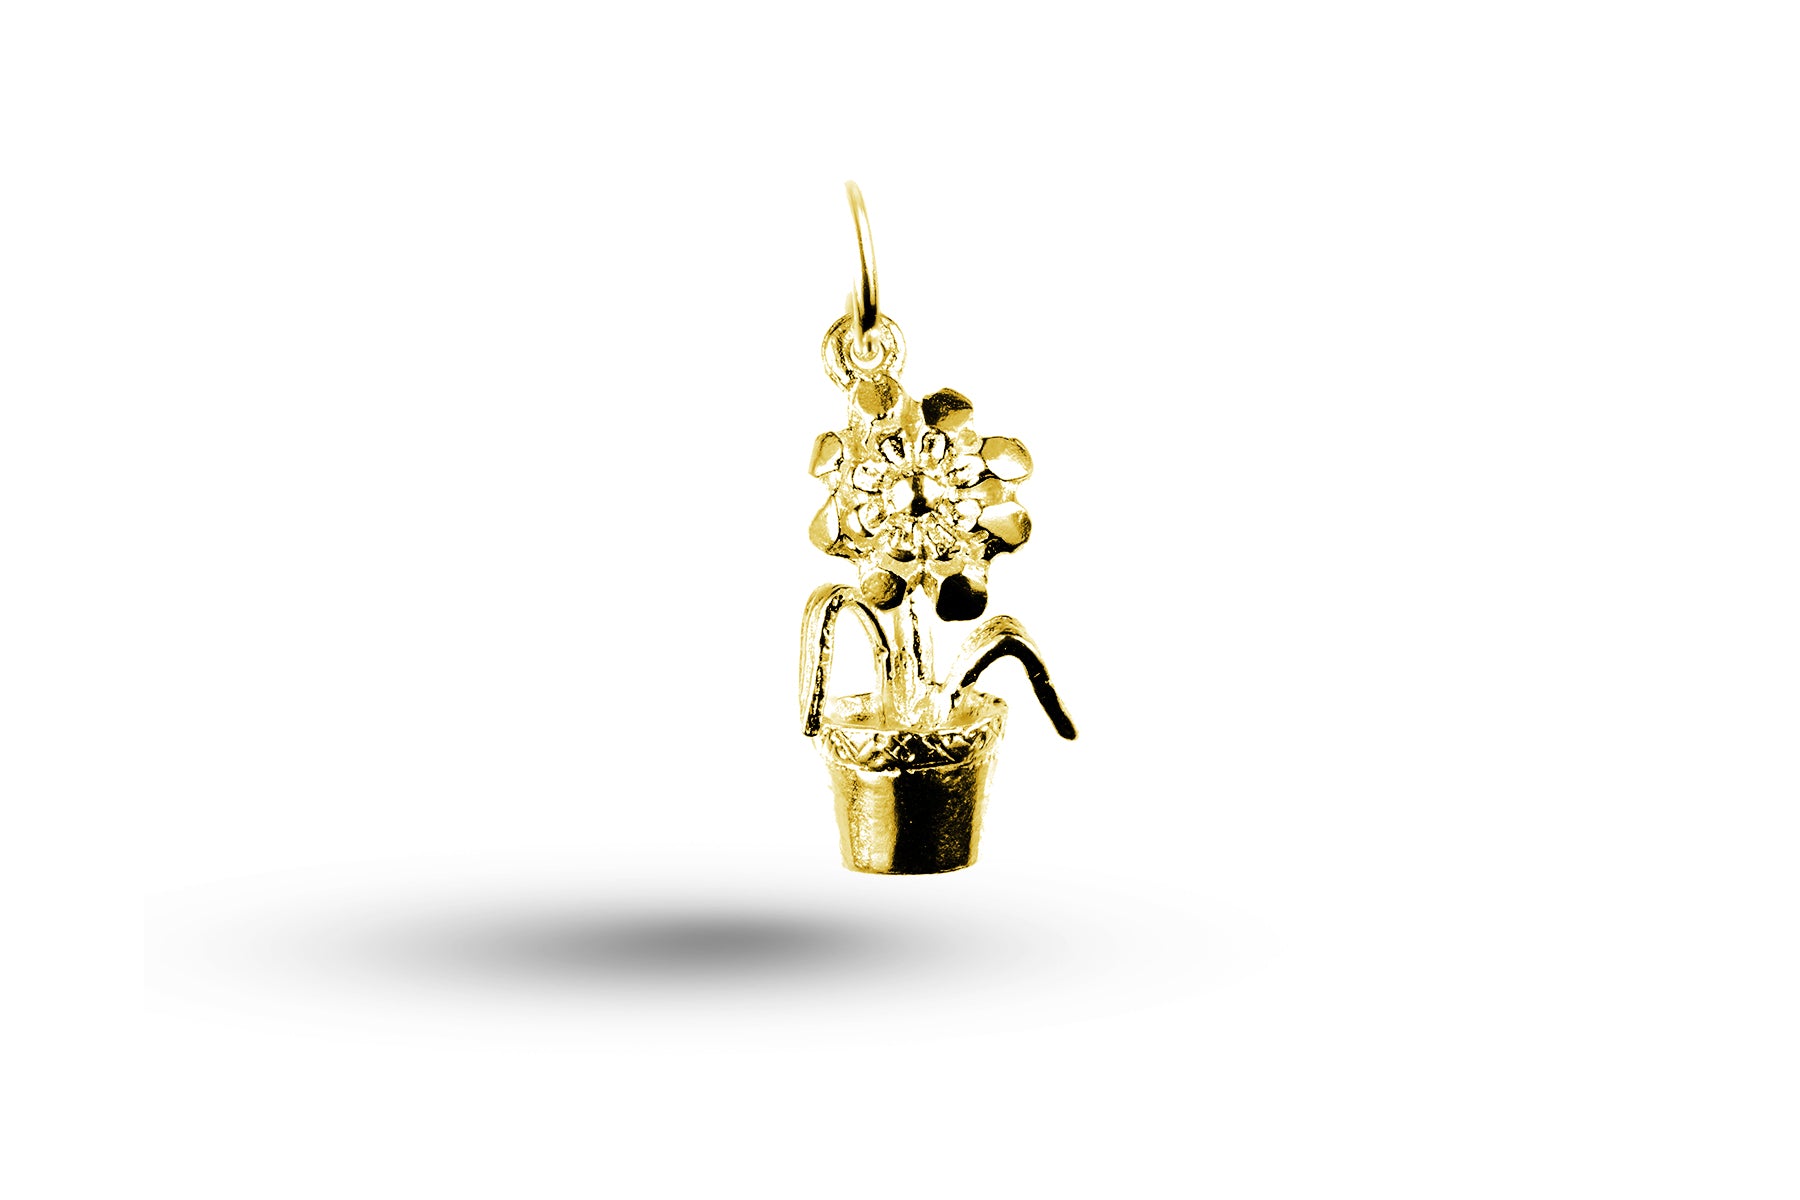 Yellow gold Flower in Pot charm.